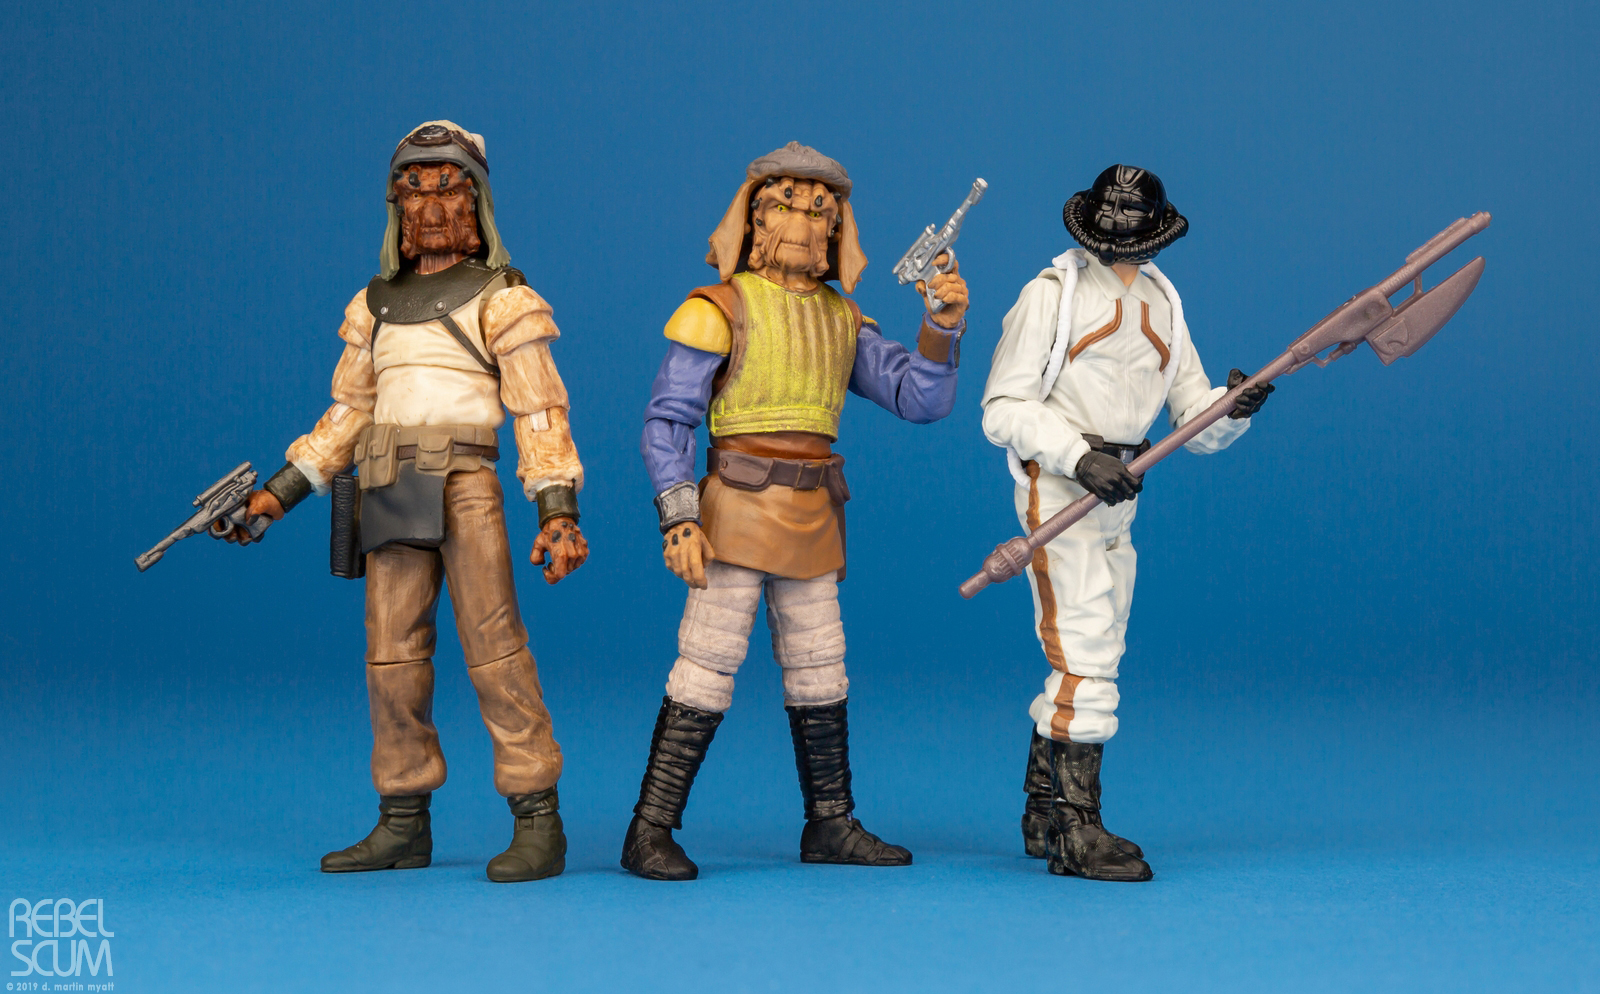 Special-3-Action-Figures-Set-The-Vintage-Collection-032.jpg